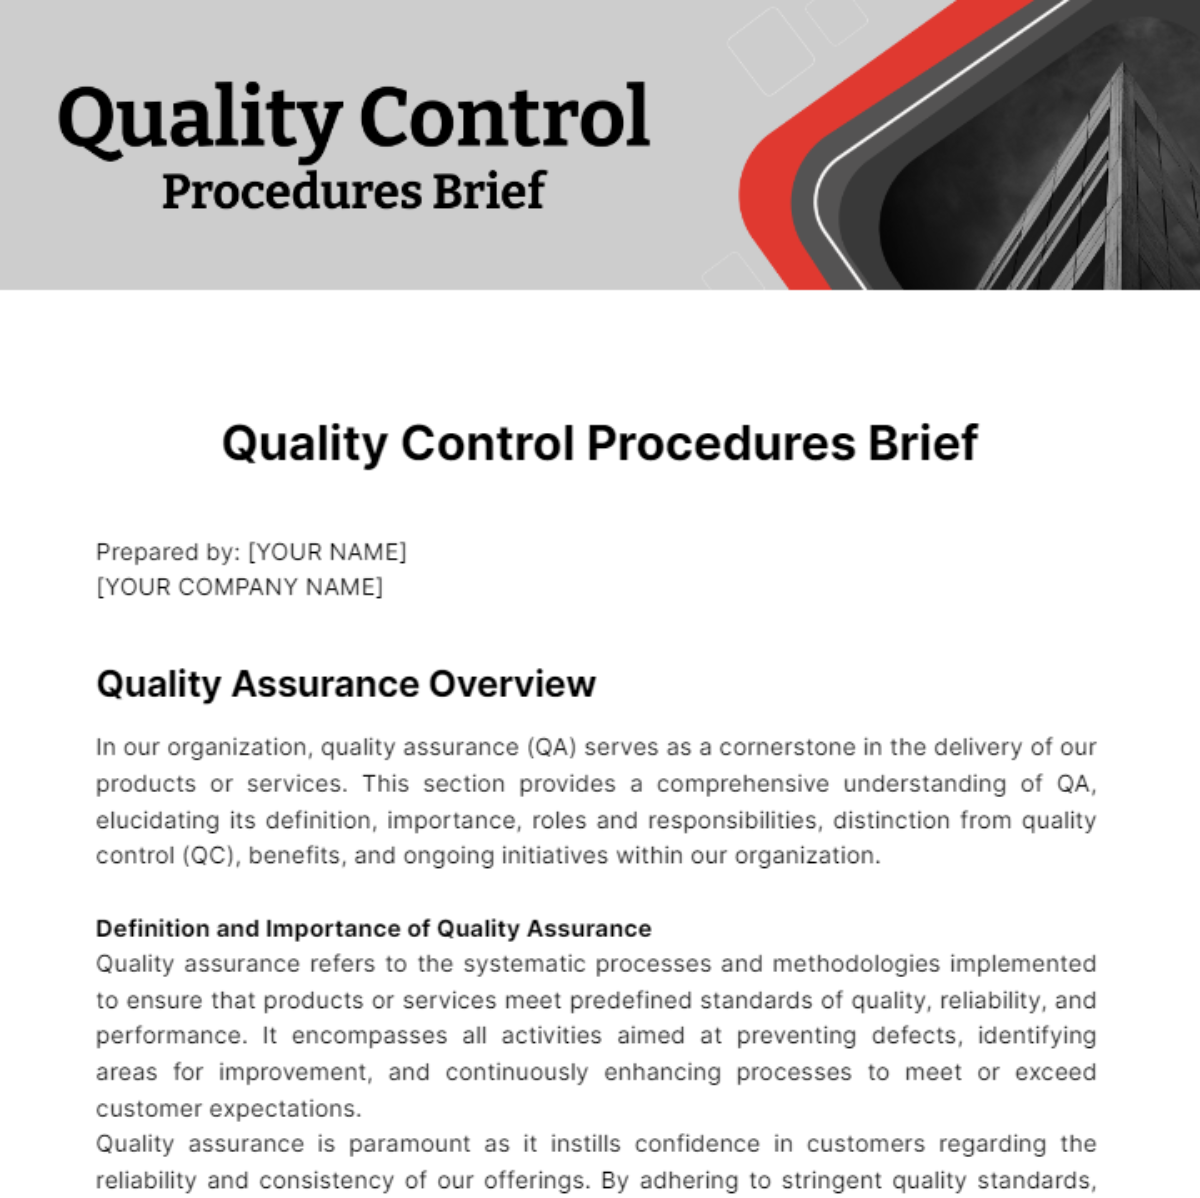 Free Quality Control Procedures Brief Template